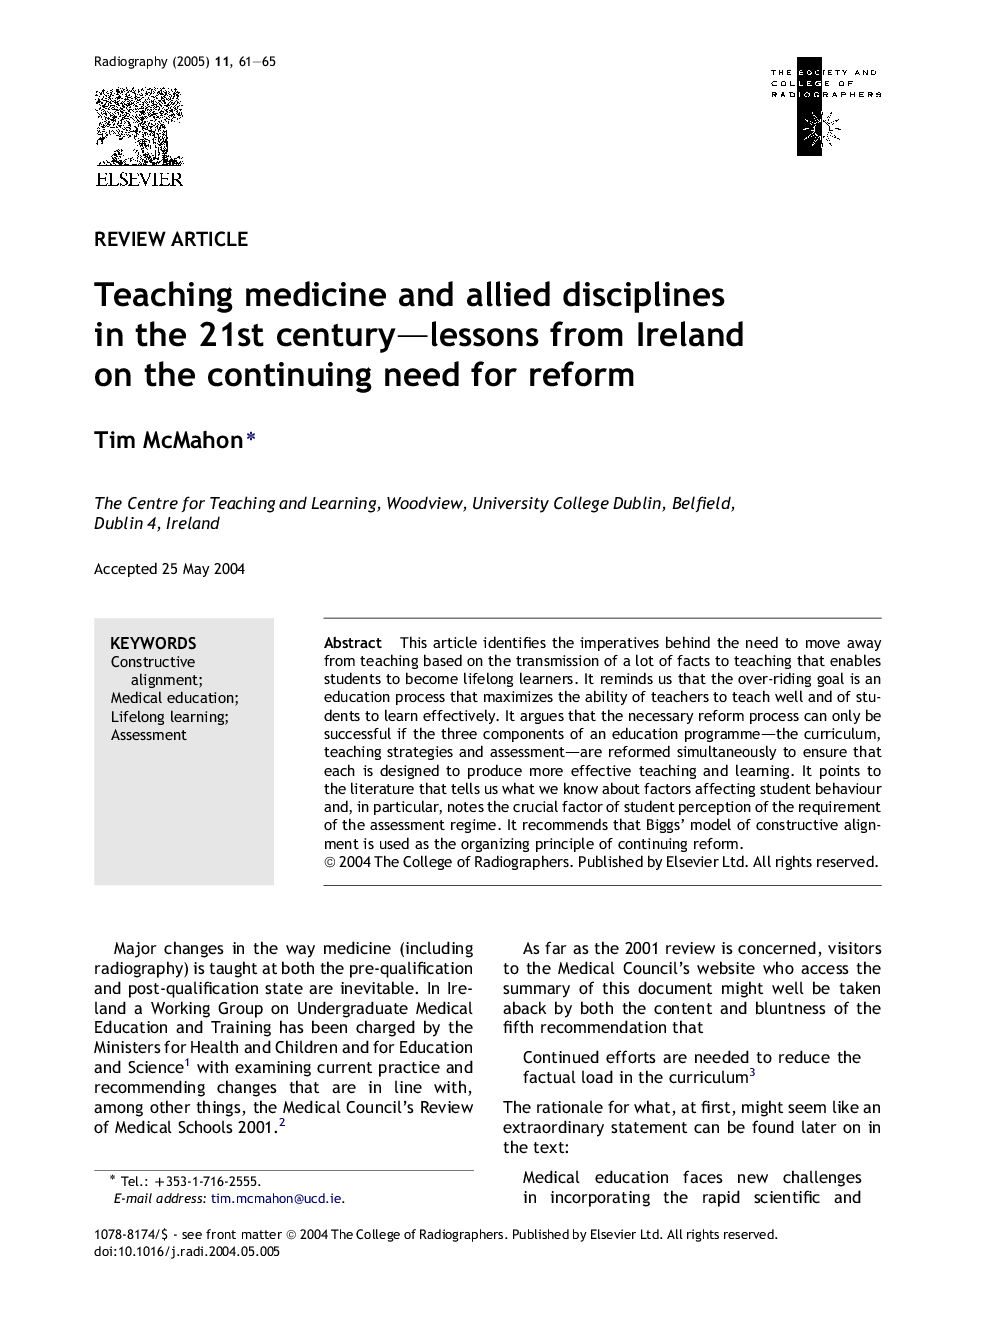 Teaching medicine and allied disciplines in the 21st century-lessons from Ireland on the continuing need for reform